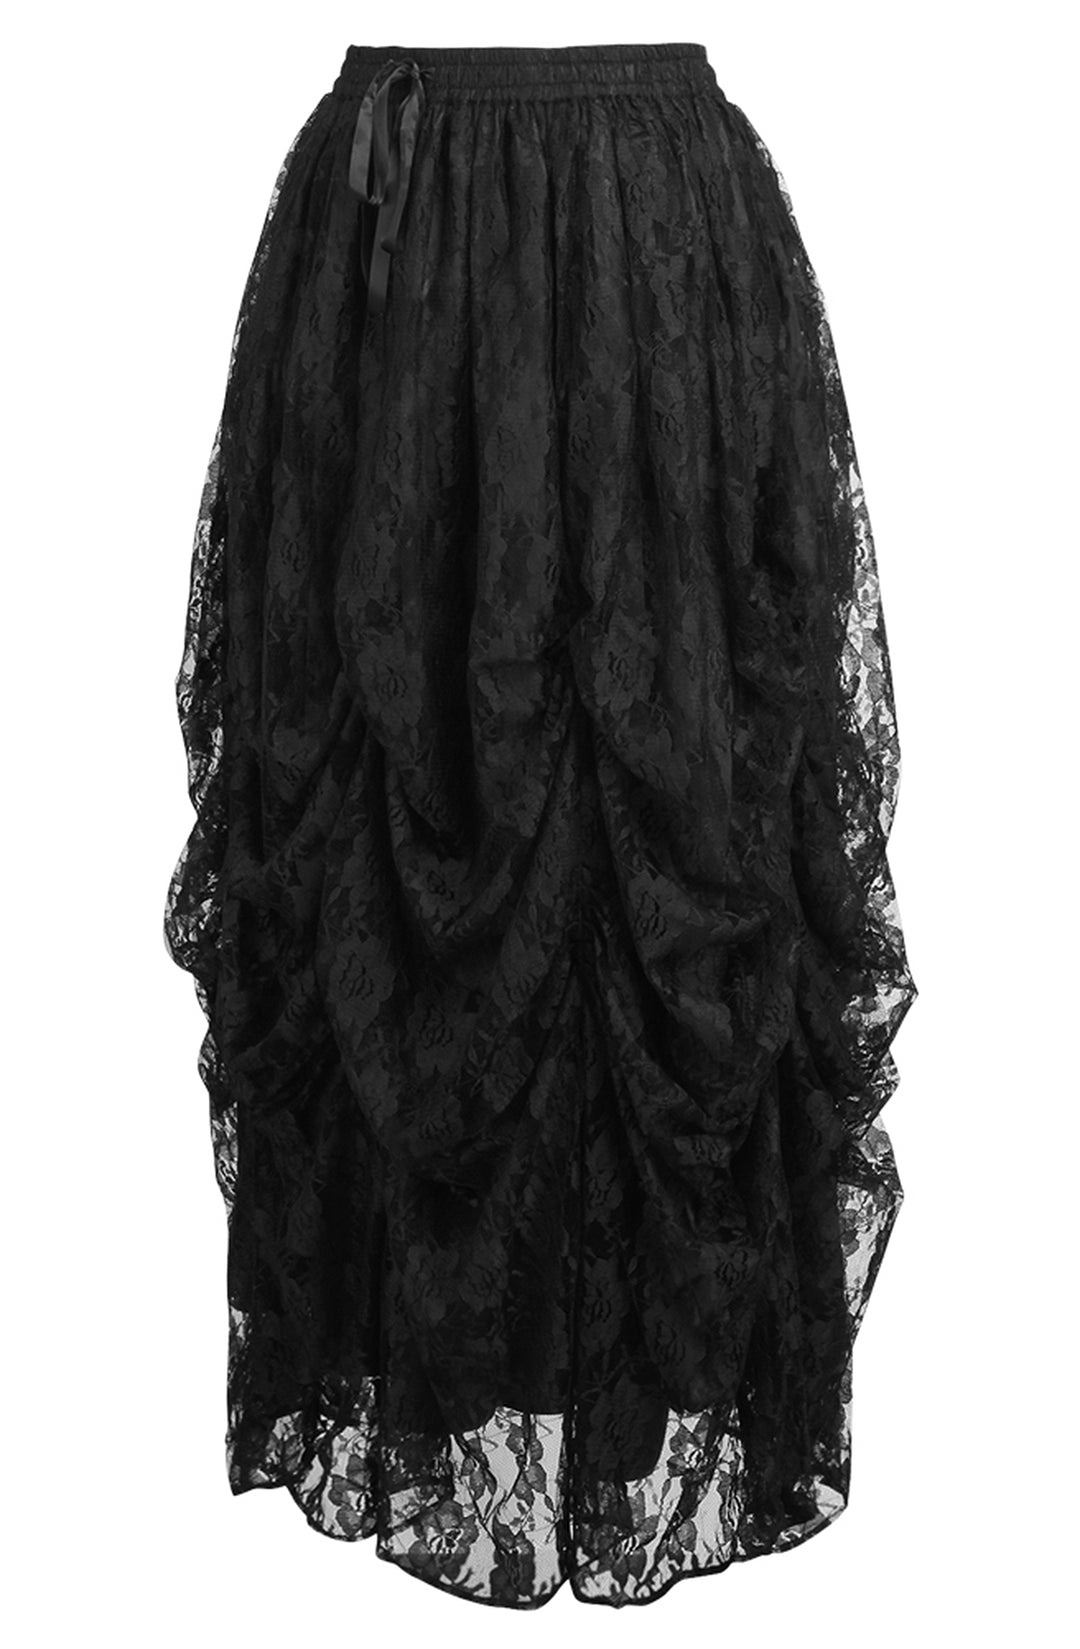 Black Lace Ball Gown Skirt 3